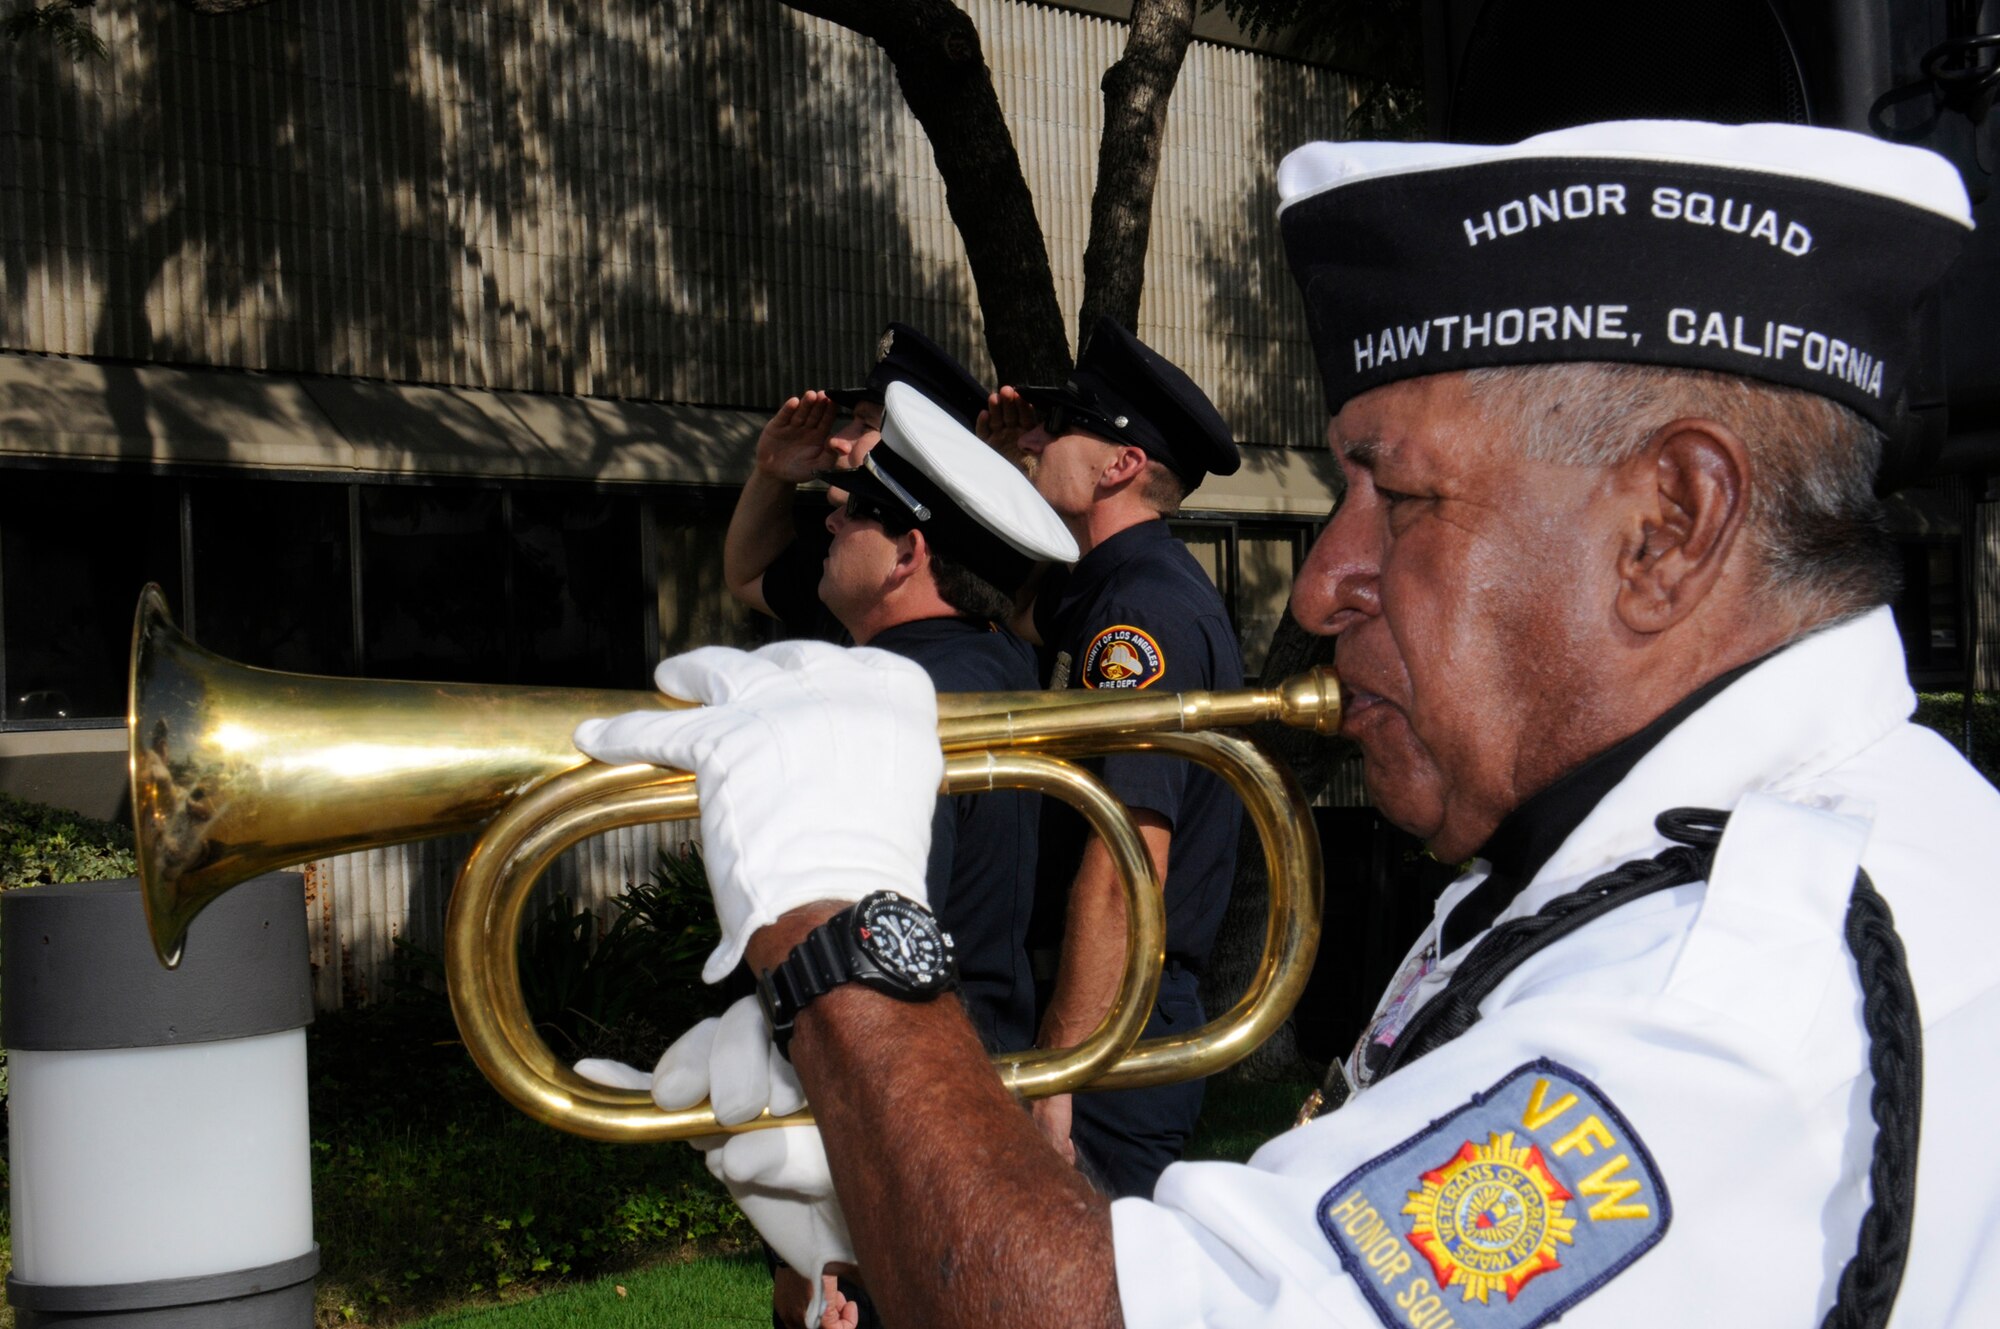 A VFW Honor Squad member plays taps at the City of Hawthorne’s annual 9-11 ceremony. (Photo by Joe Juarez)